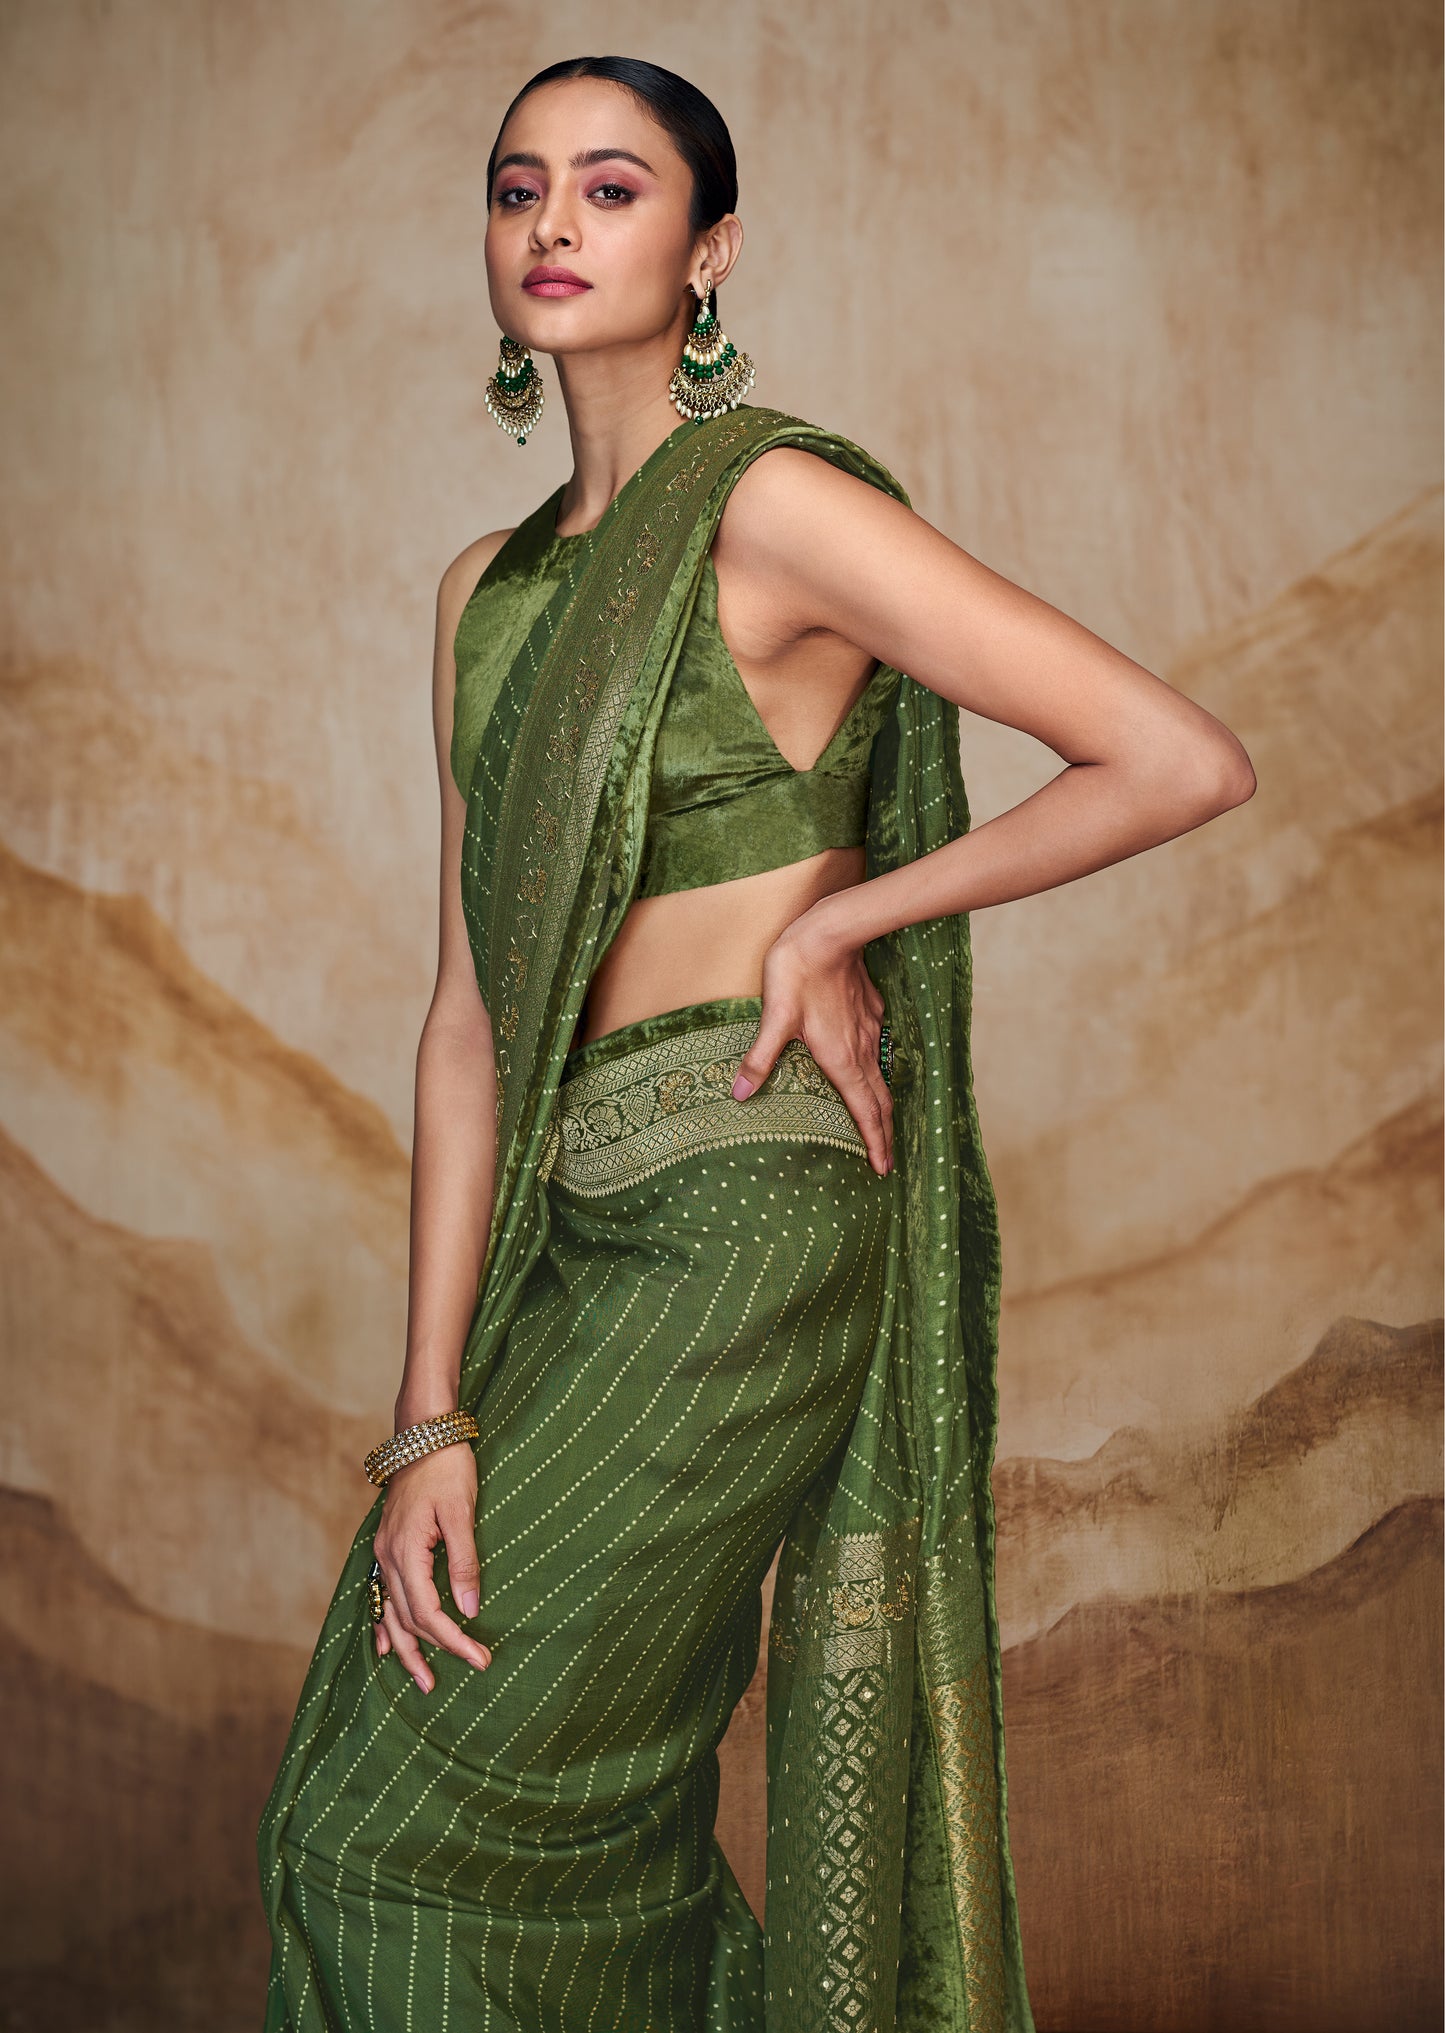 Green Bandhani Saree with Hand Embroidered Border and Velvet Blouse